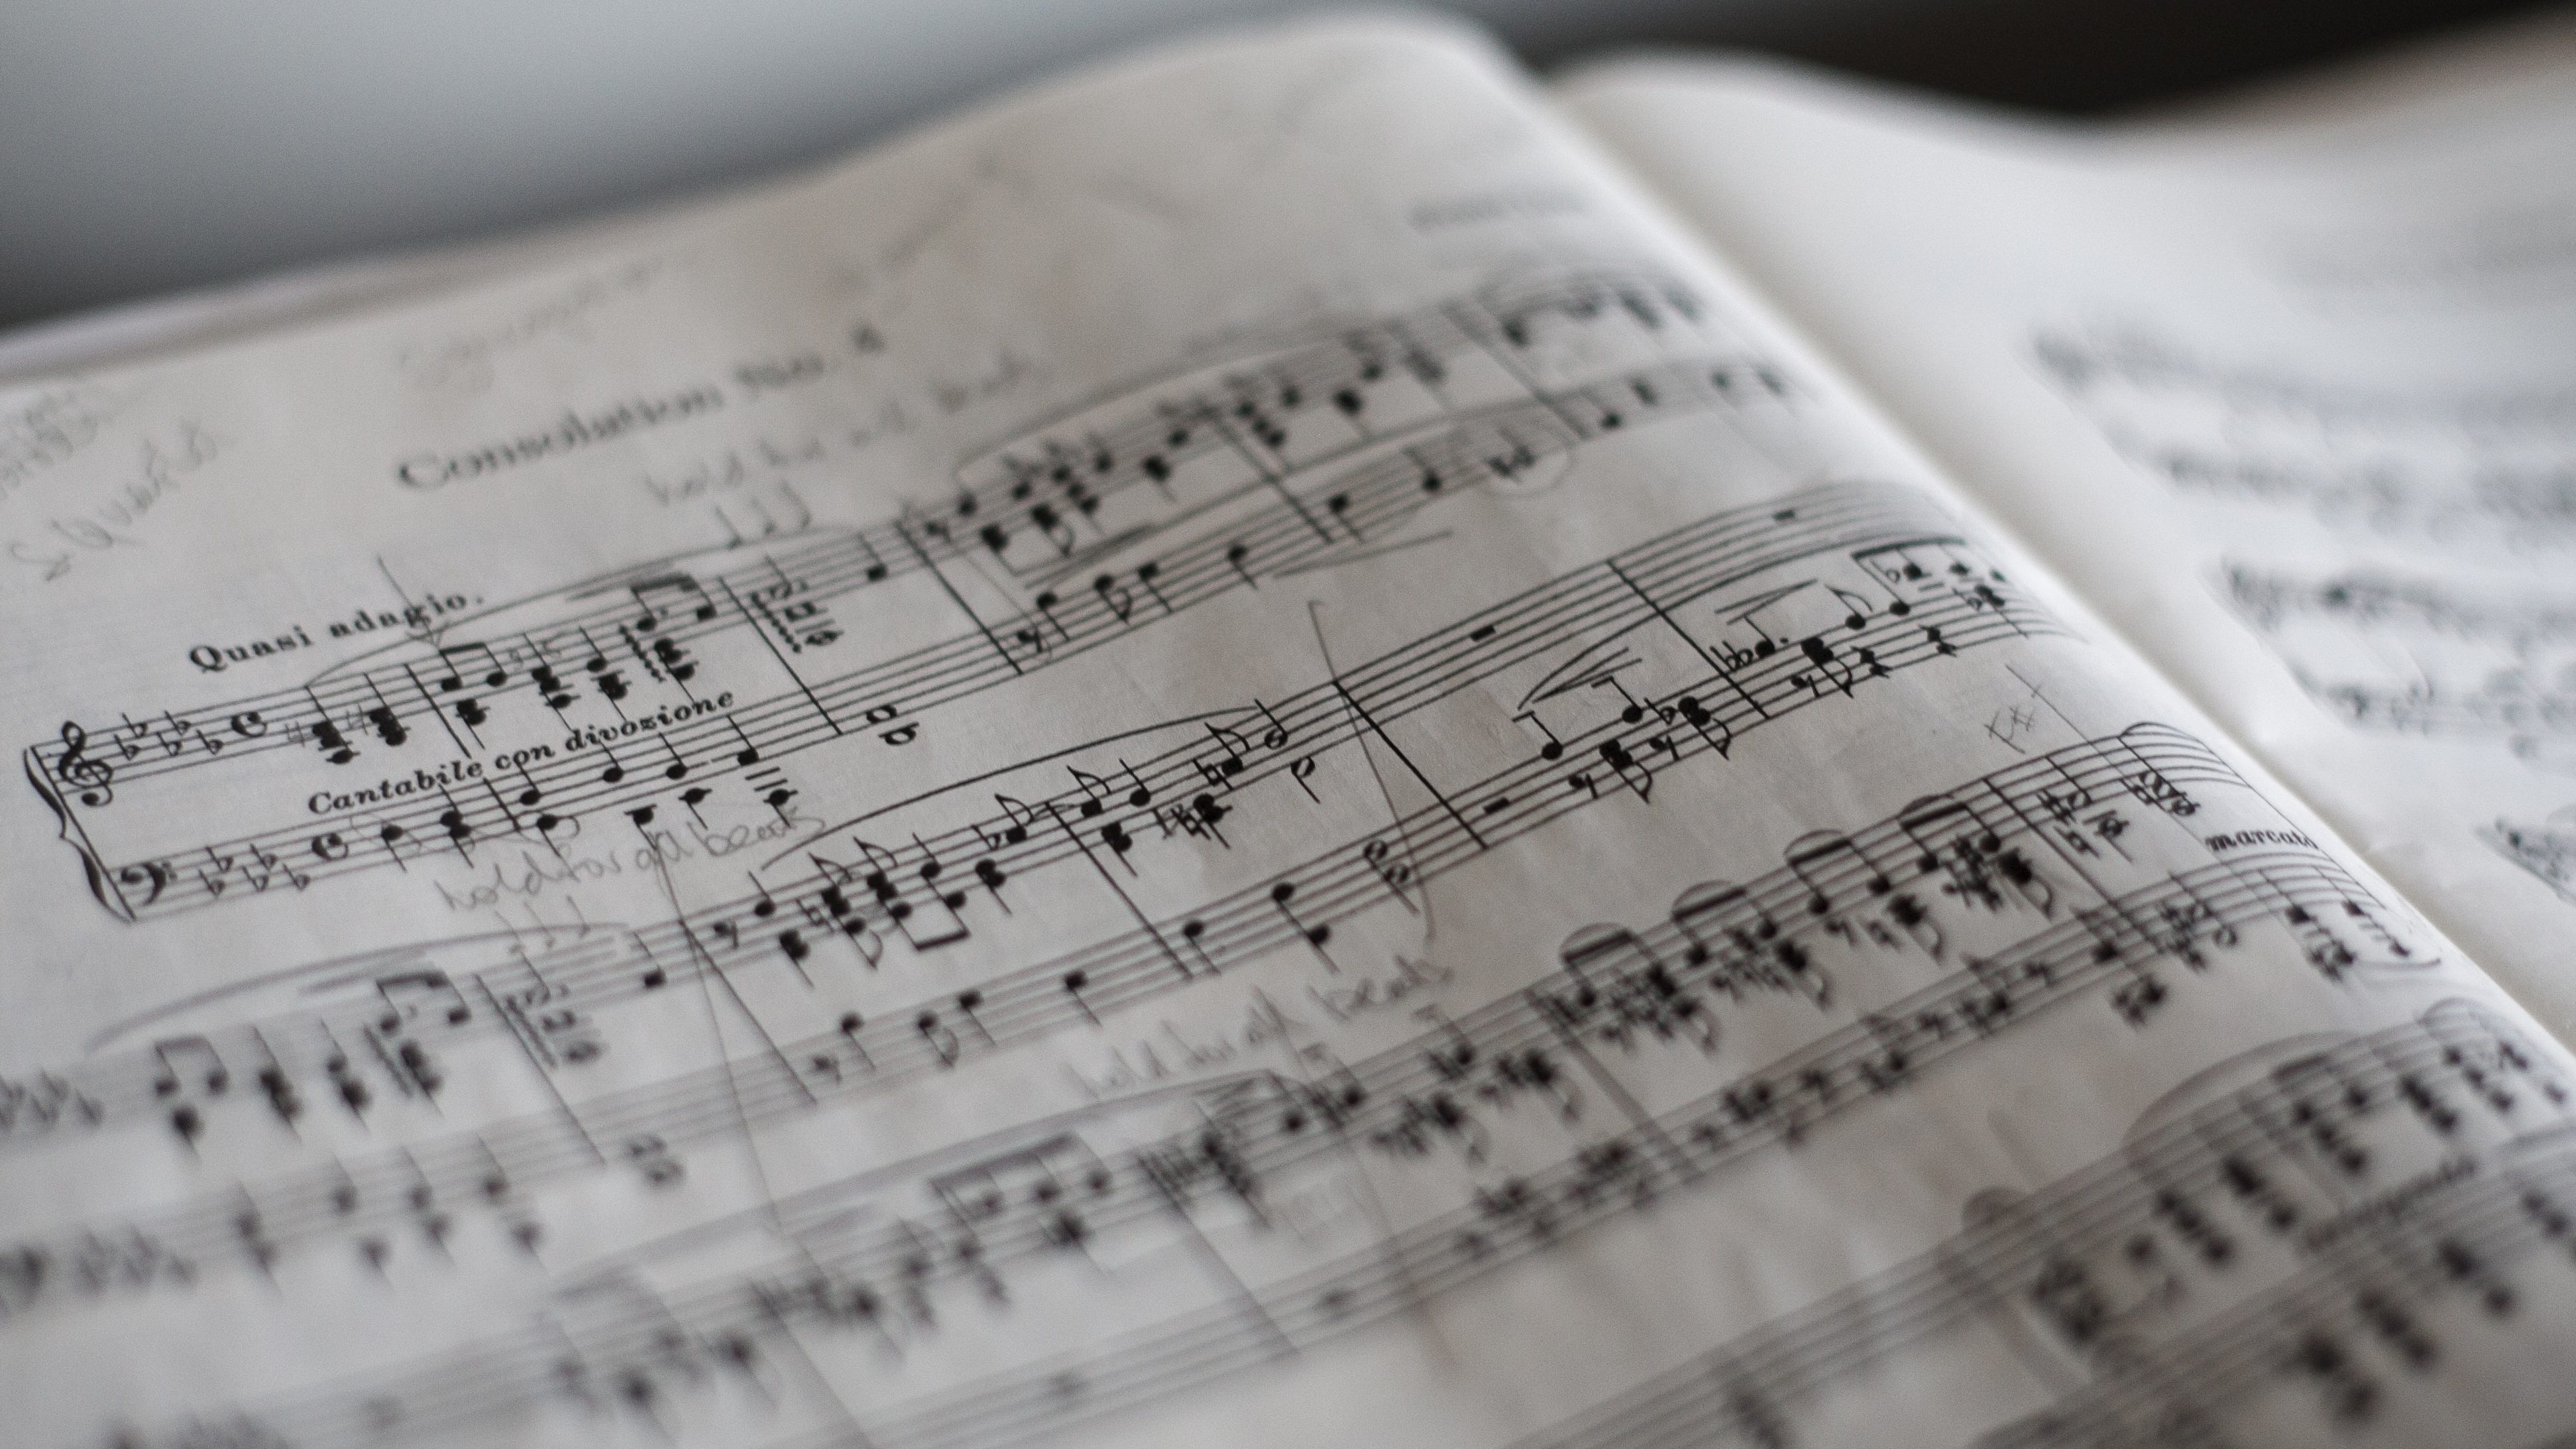 Sheet music up close illustrating how we can hear music from protein chains